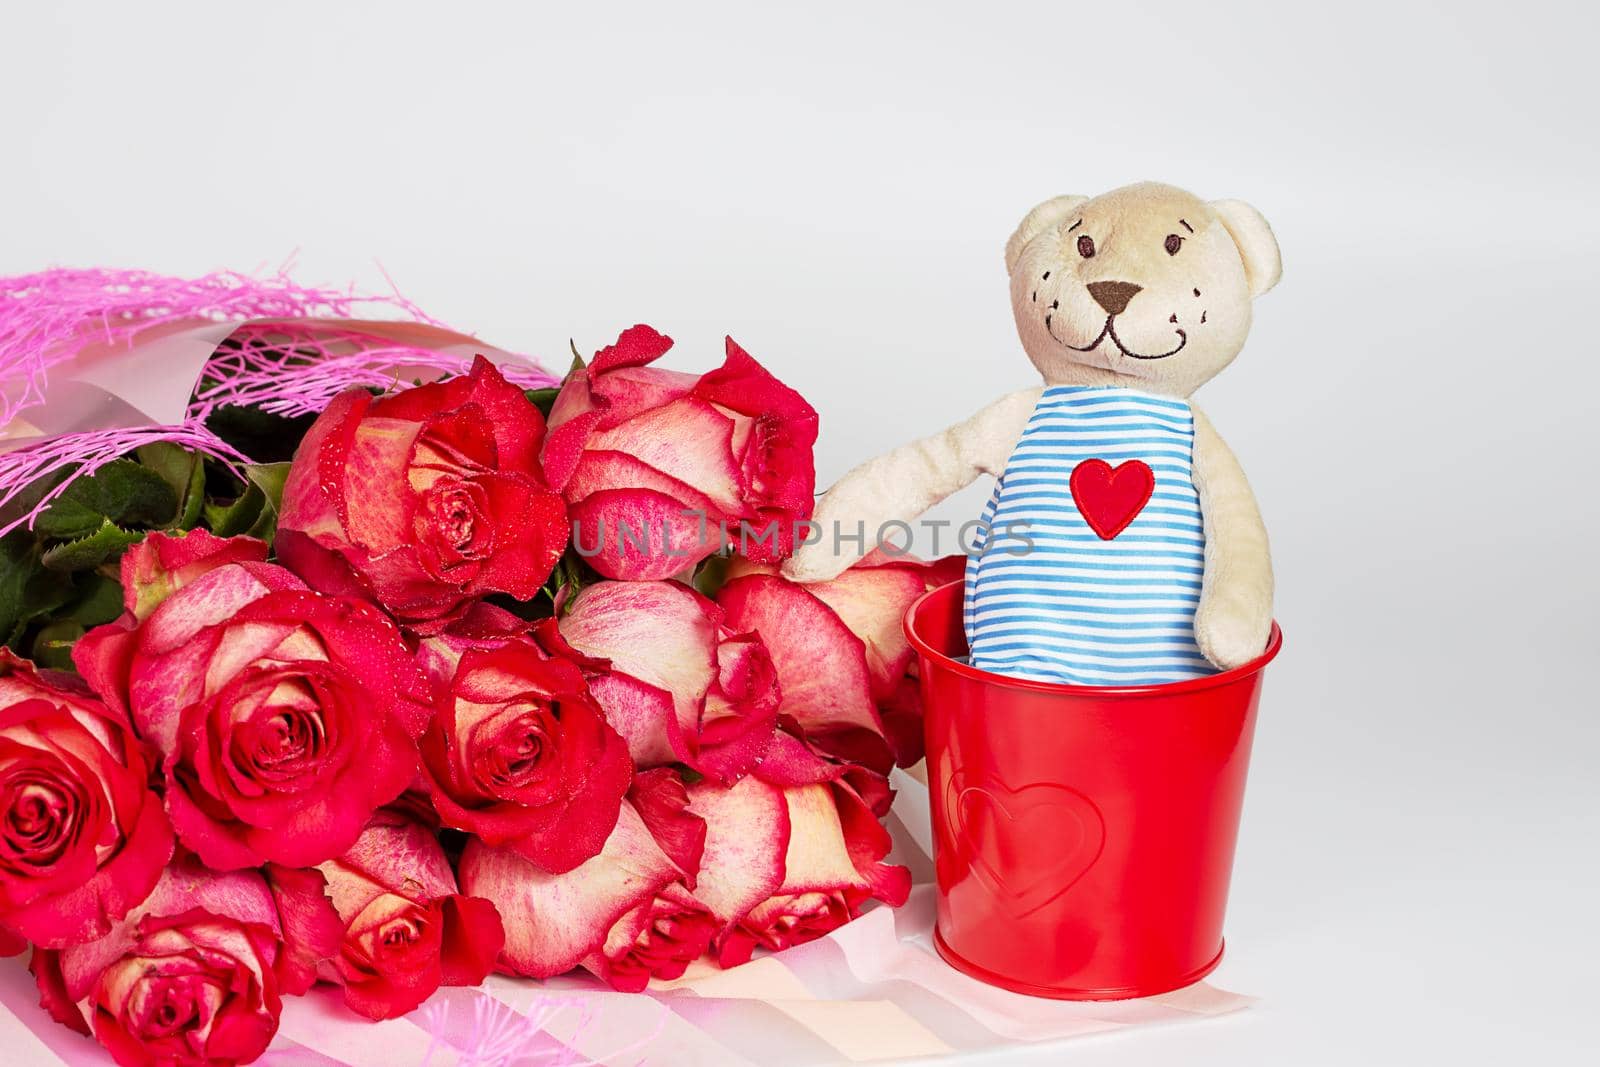 A bouquet of red roses in a gift paper package and a soft toy bear with an embroidered heart. The concept of a gift to a woman for any event, a symbol of love, valentine's day